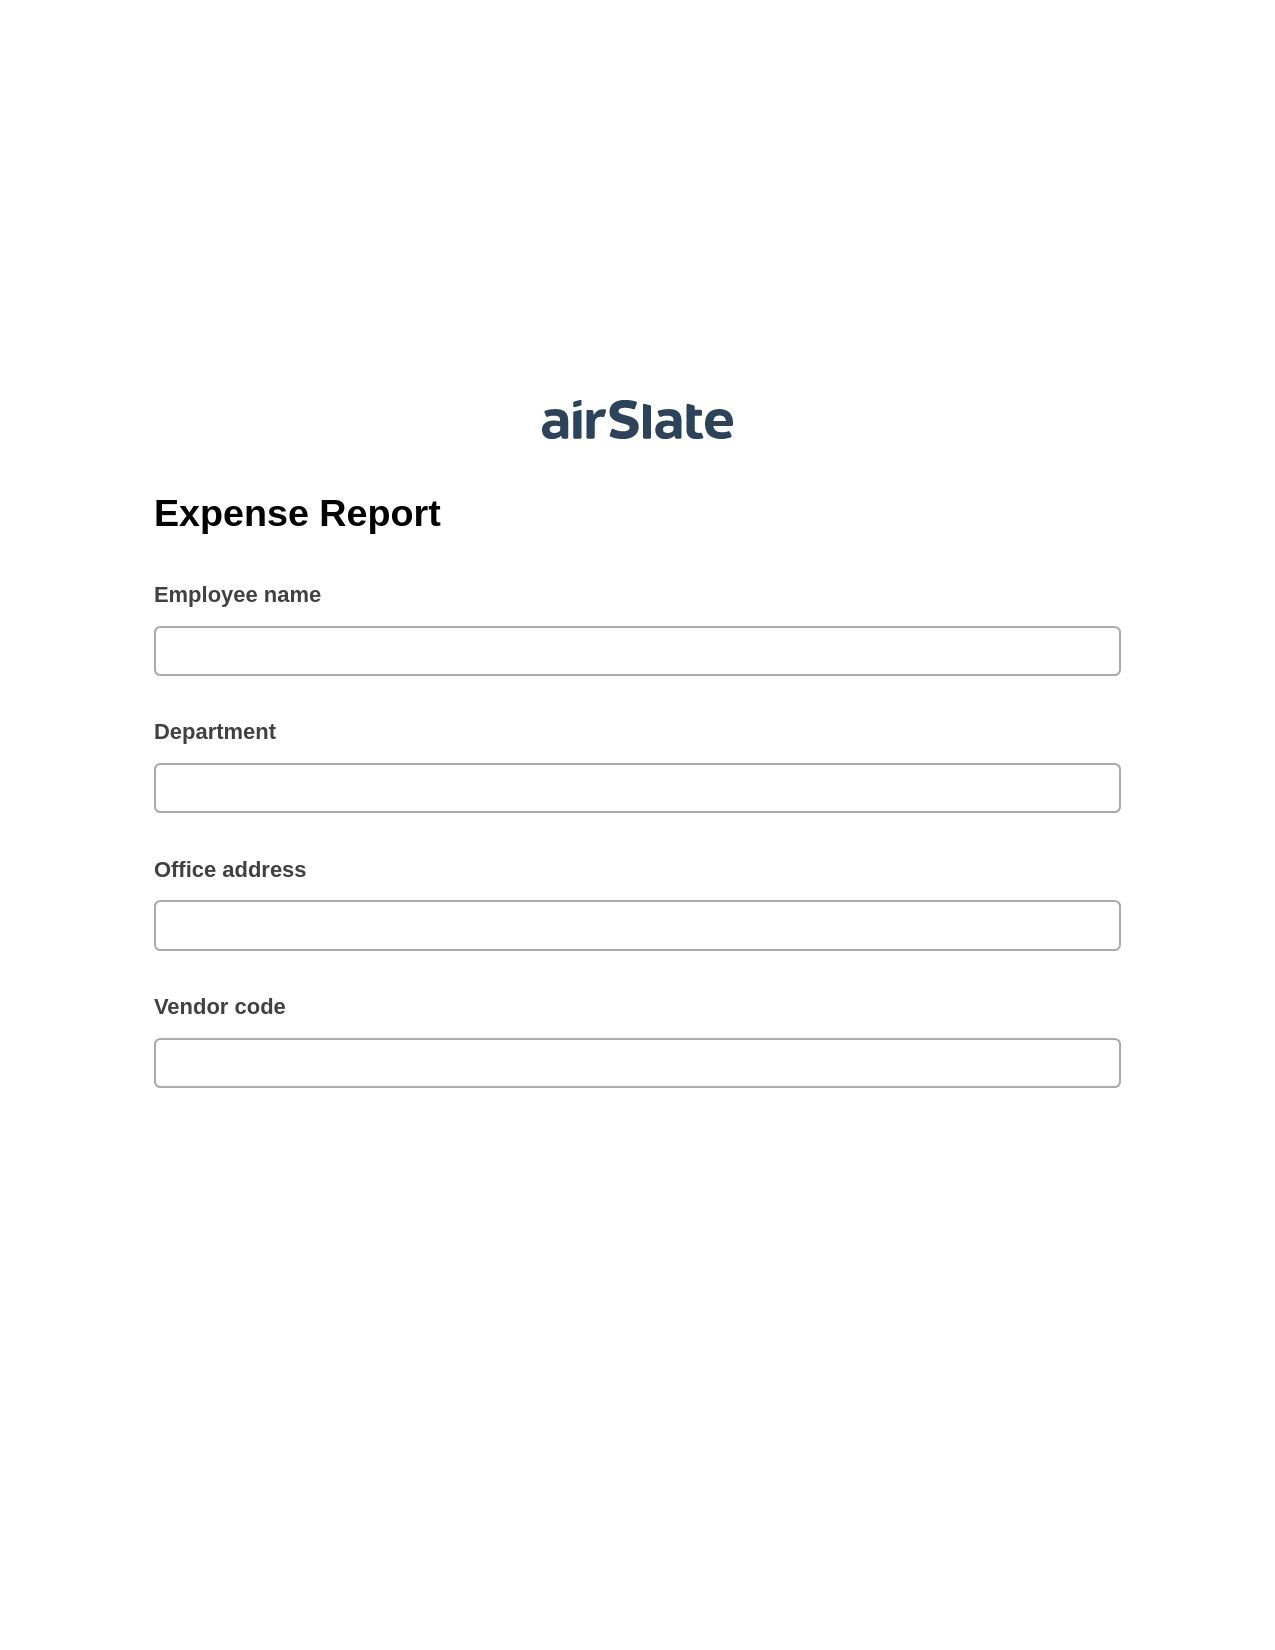 Expense Report Pre-fill Dropdowns from CSV File Bot, Export to MS Dynamics 365 Bot, Archive to SharePoint Folder Bot